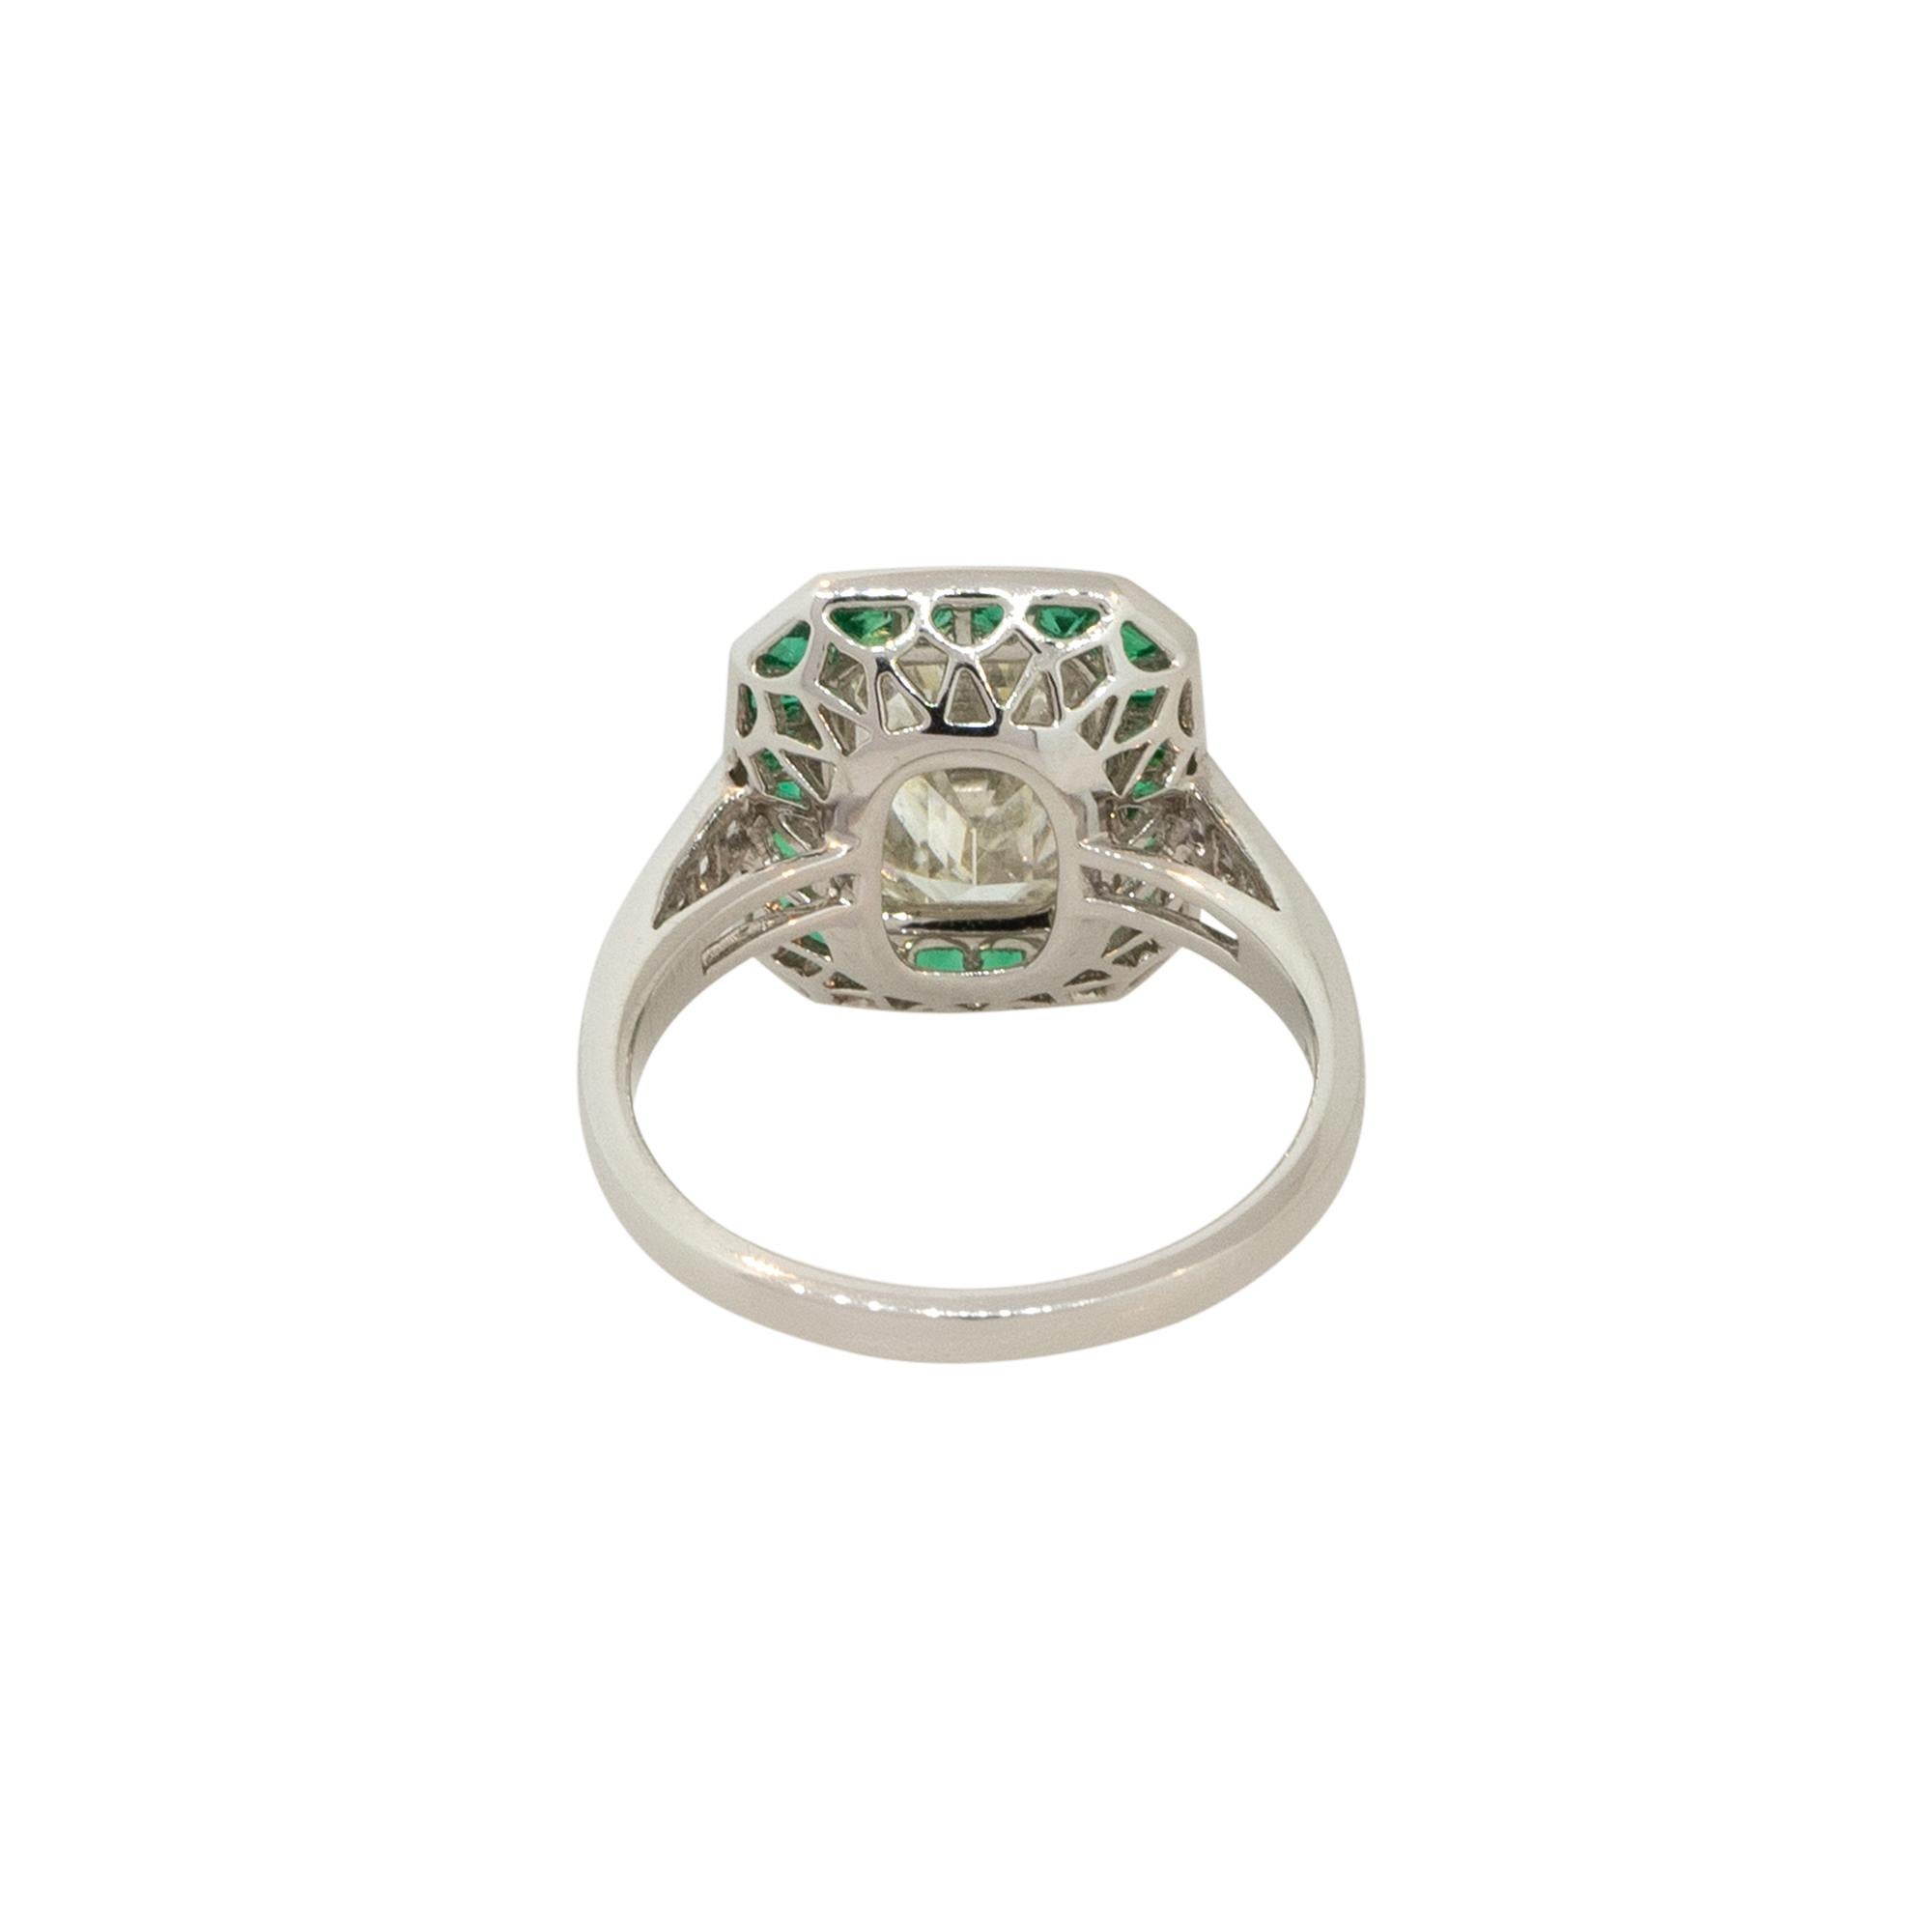 Platinum 2.51ctw Emerald Cut Diamond Emerald Halo Engagement Ring

Find this Platinum 2.51ct Emerald Cut Diamond Emerald Halo Engagement Ring at Raymond Lee Jewelers in Boca Raton -- Palm Beach County's destination for engagement rings, men's